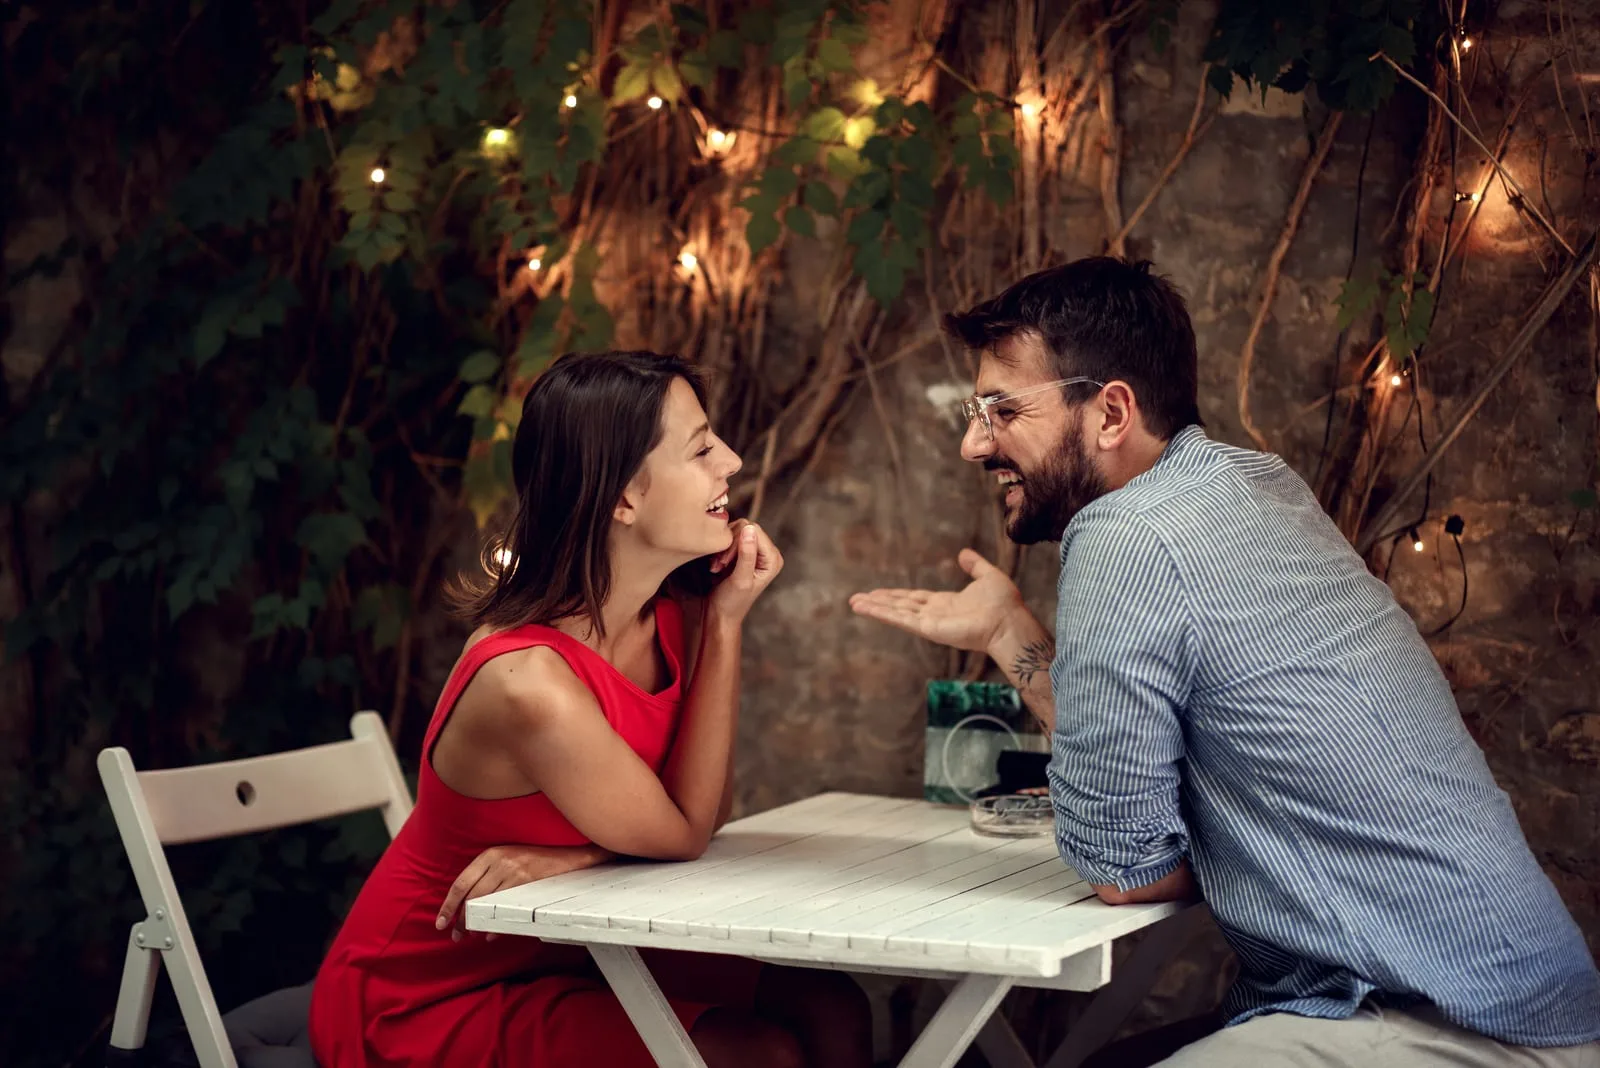 smiling man flirting with woman